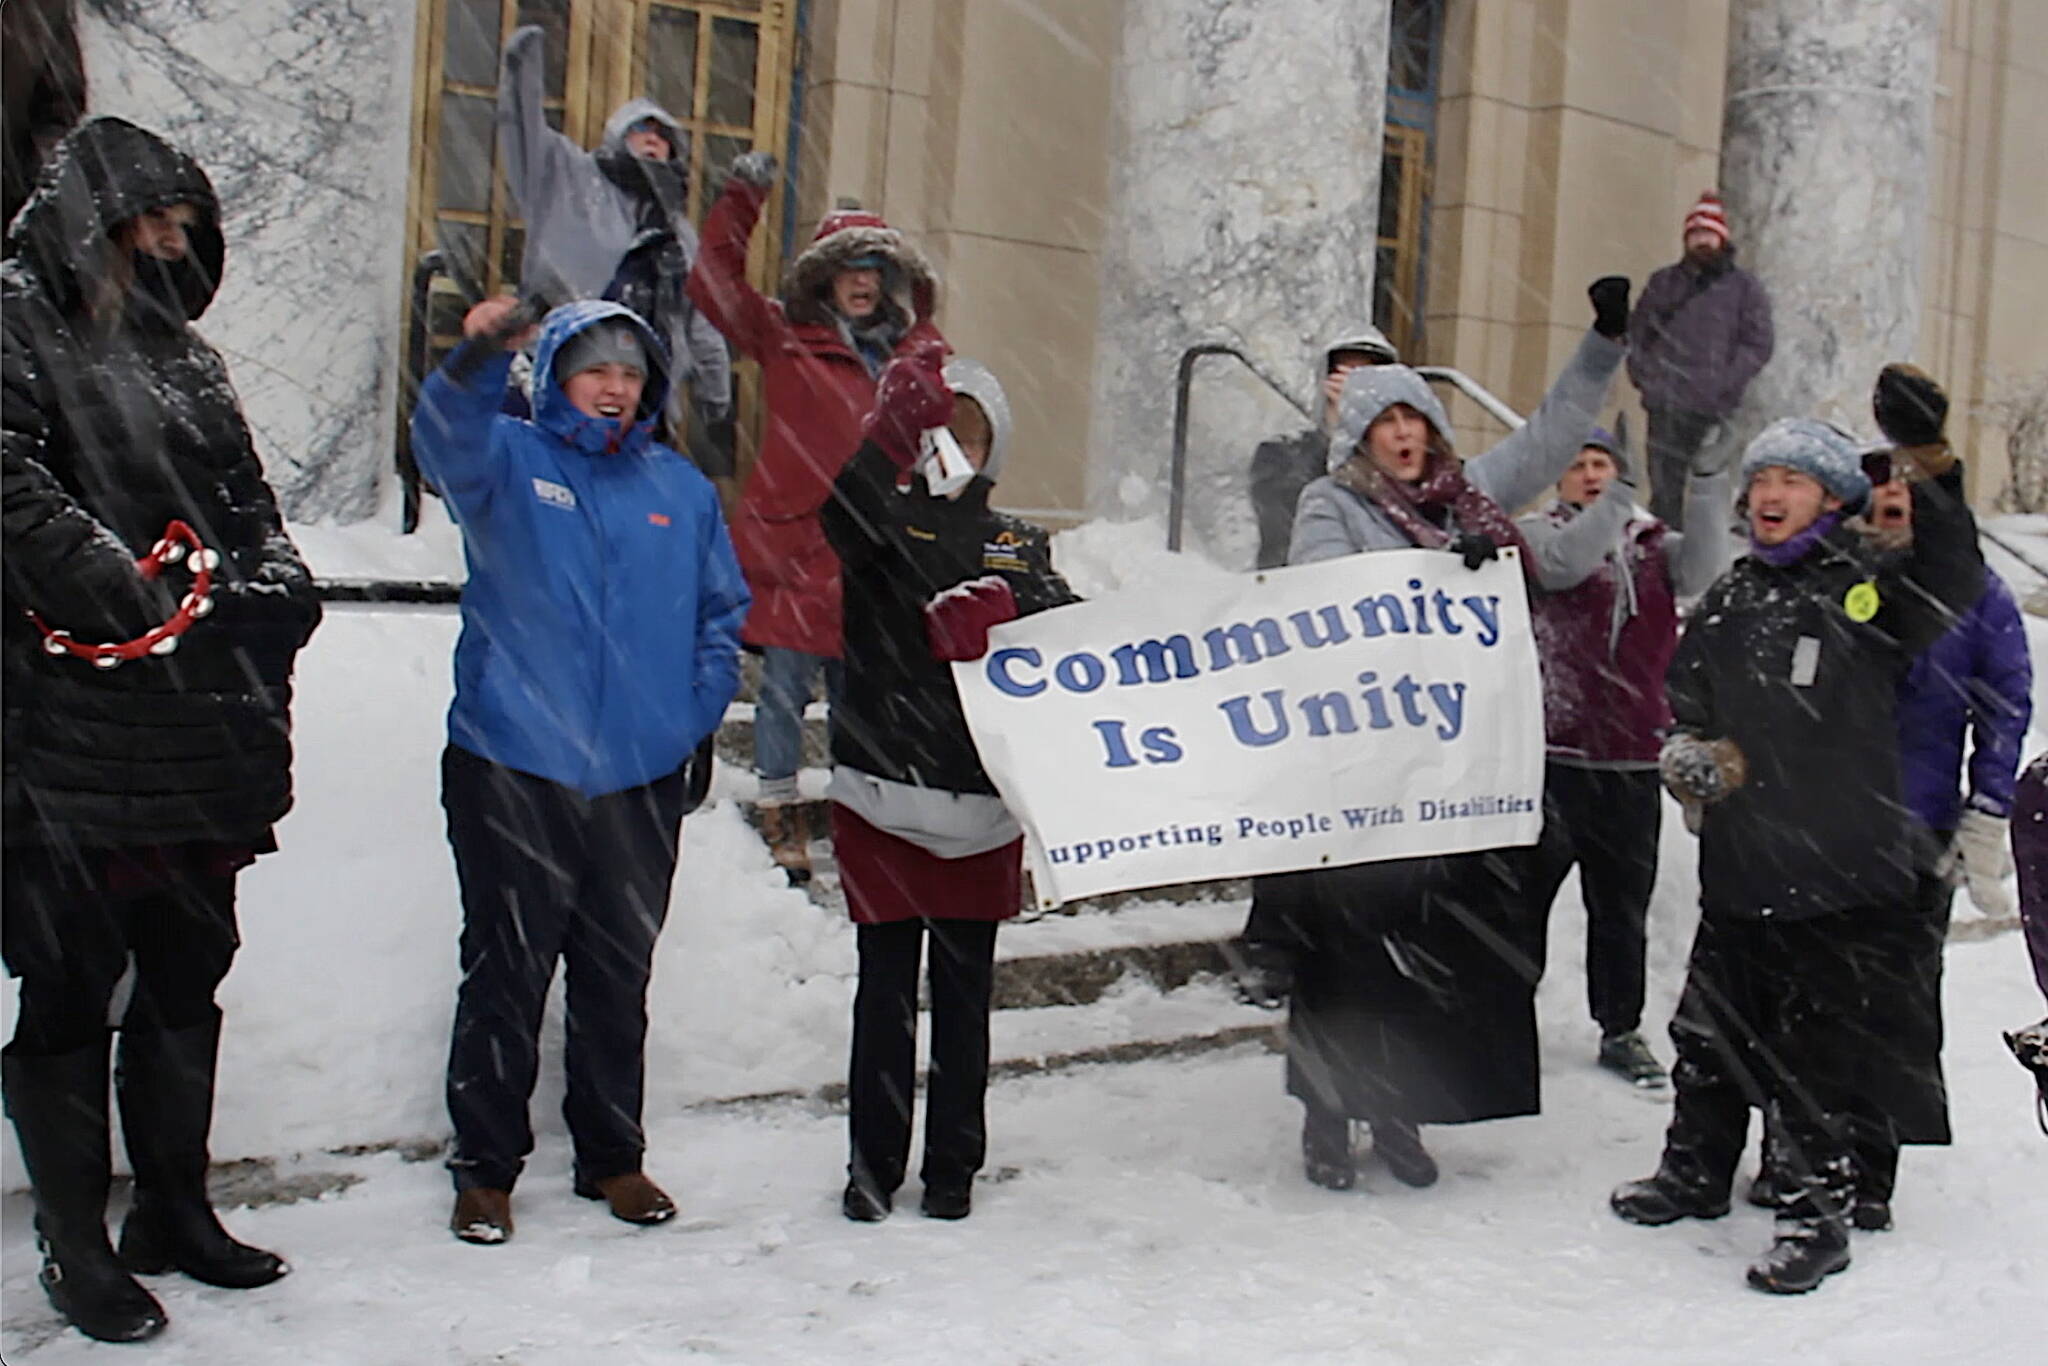 Mark Sabbatini / Juneau Empire
Alaska residents with disabilities and advocates providing services intended to support self-sufficiency wave a banner and noisemakers during a noontime Wednesday rally in a blizzard on the steps of the Alaska State Capitol.